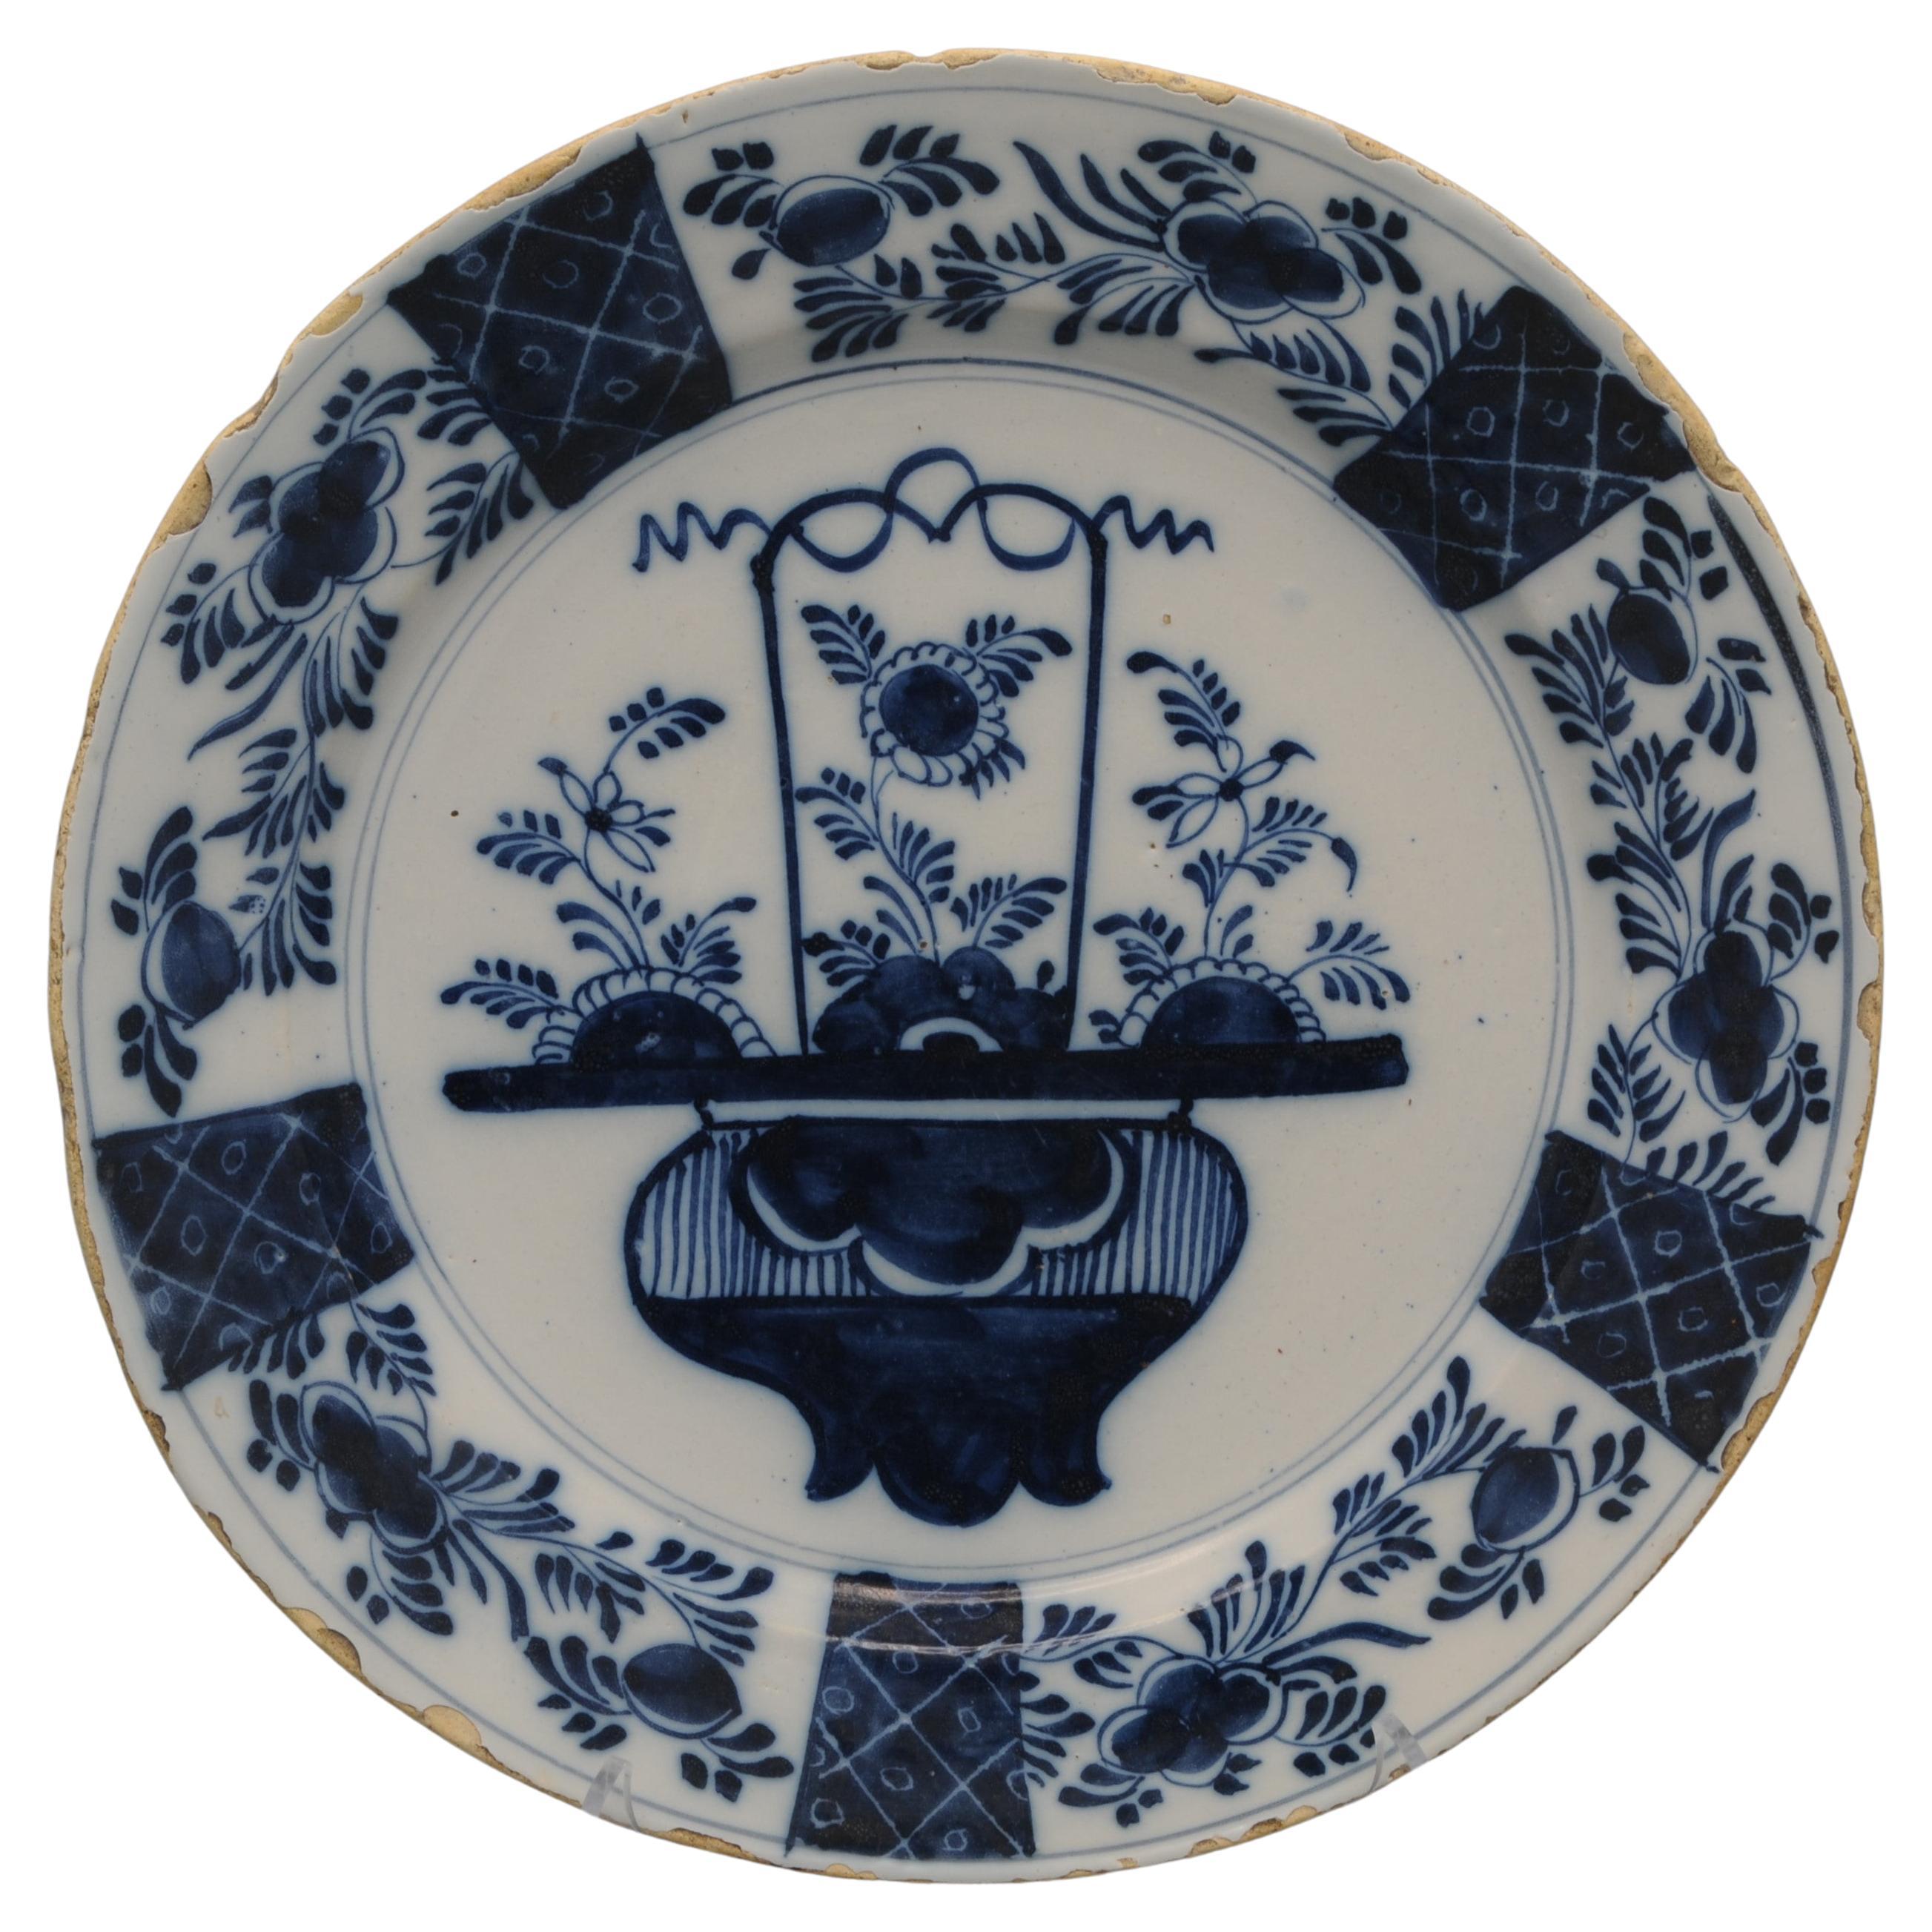 Delft - Chinoiserie dish with floral basket, second half 18th century